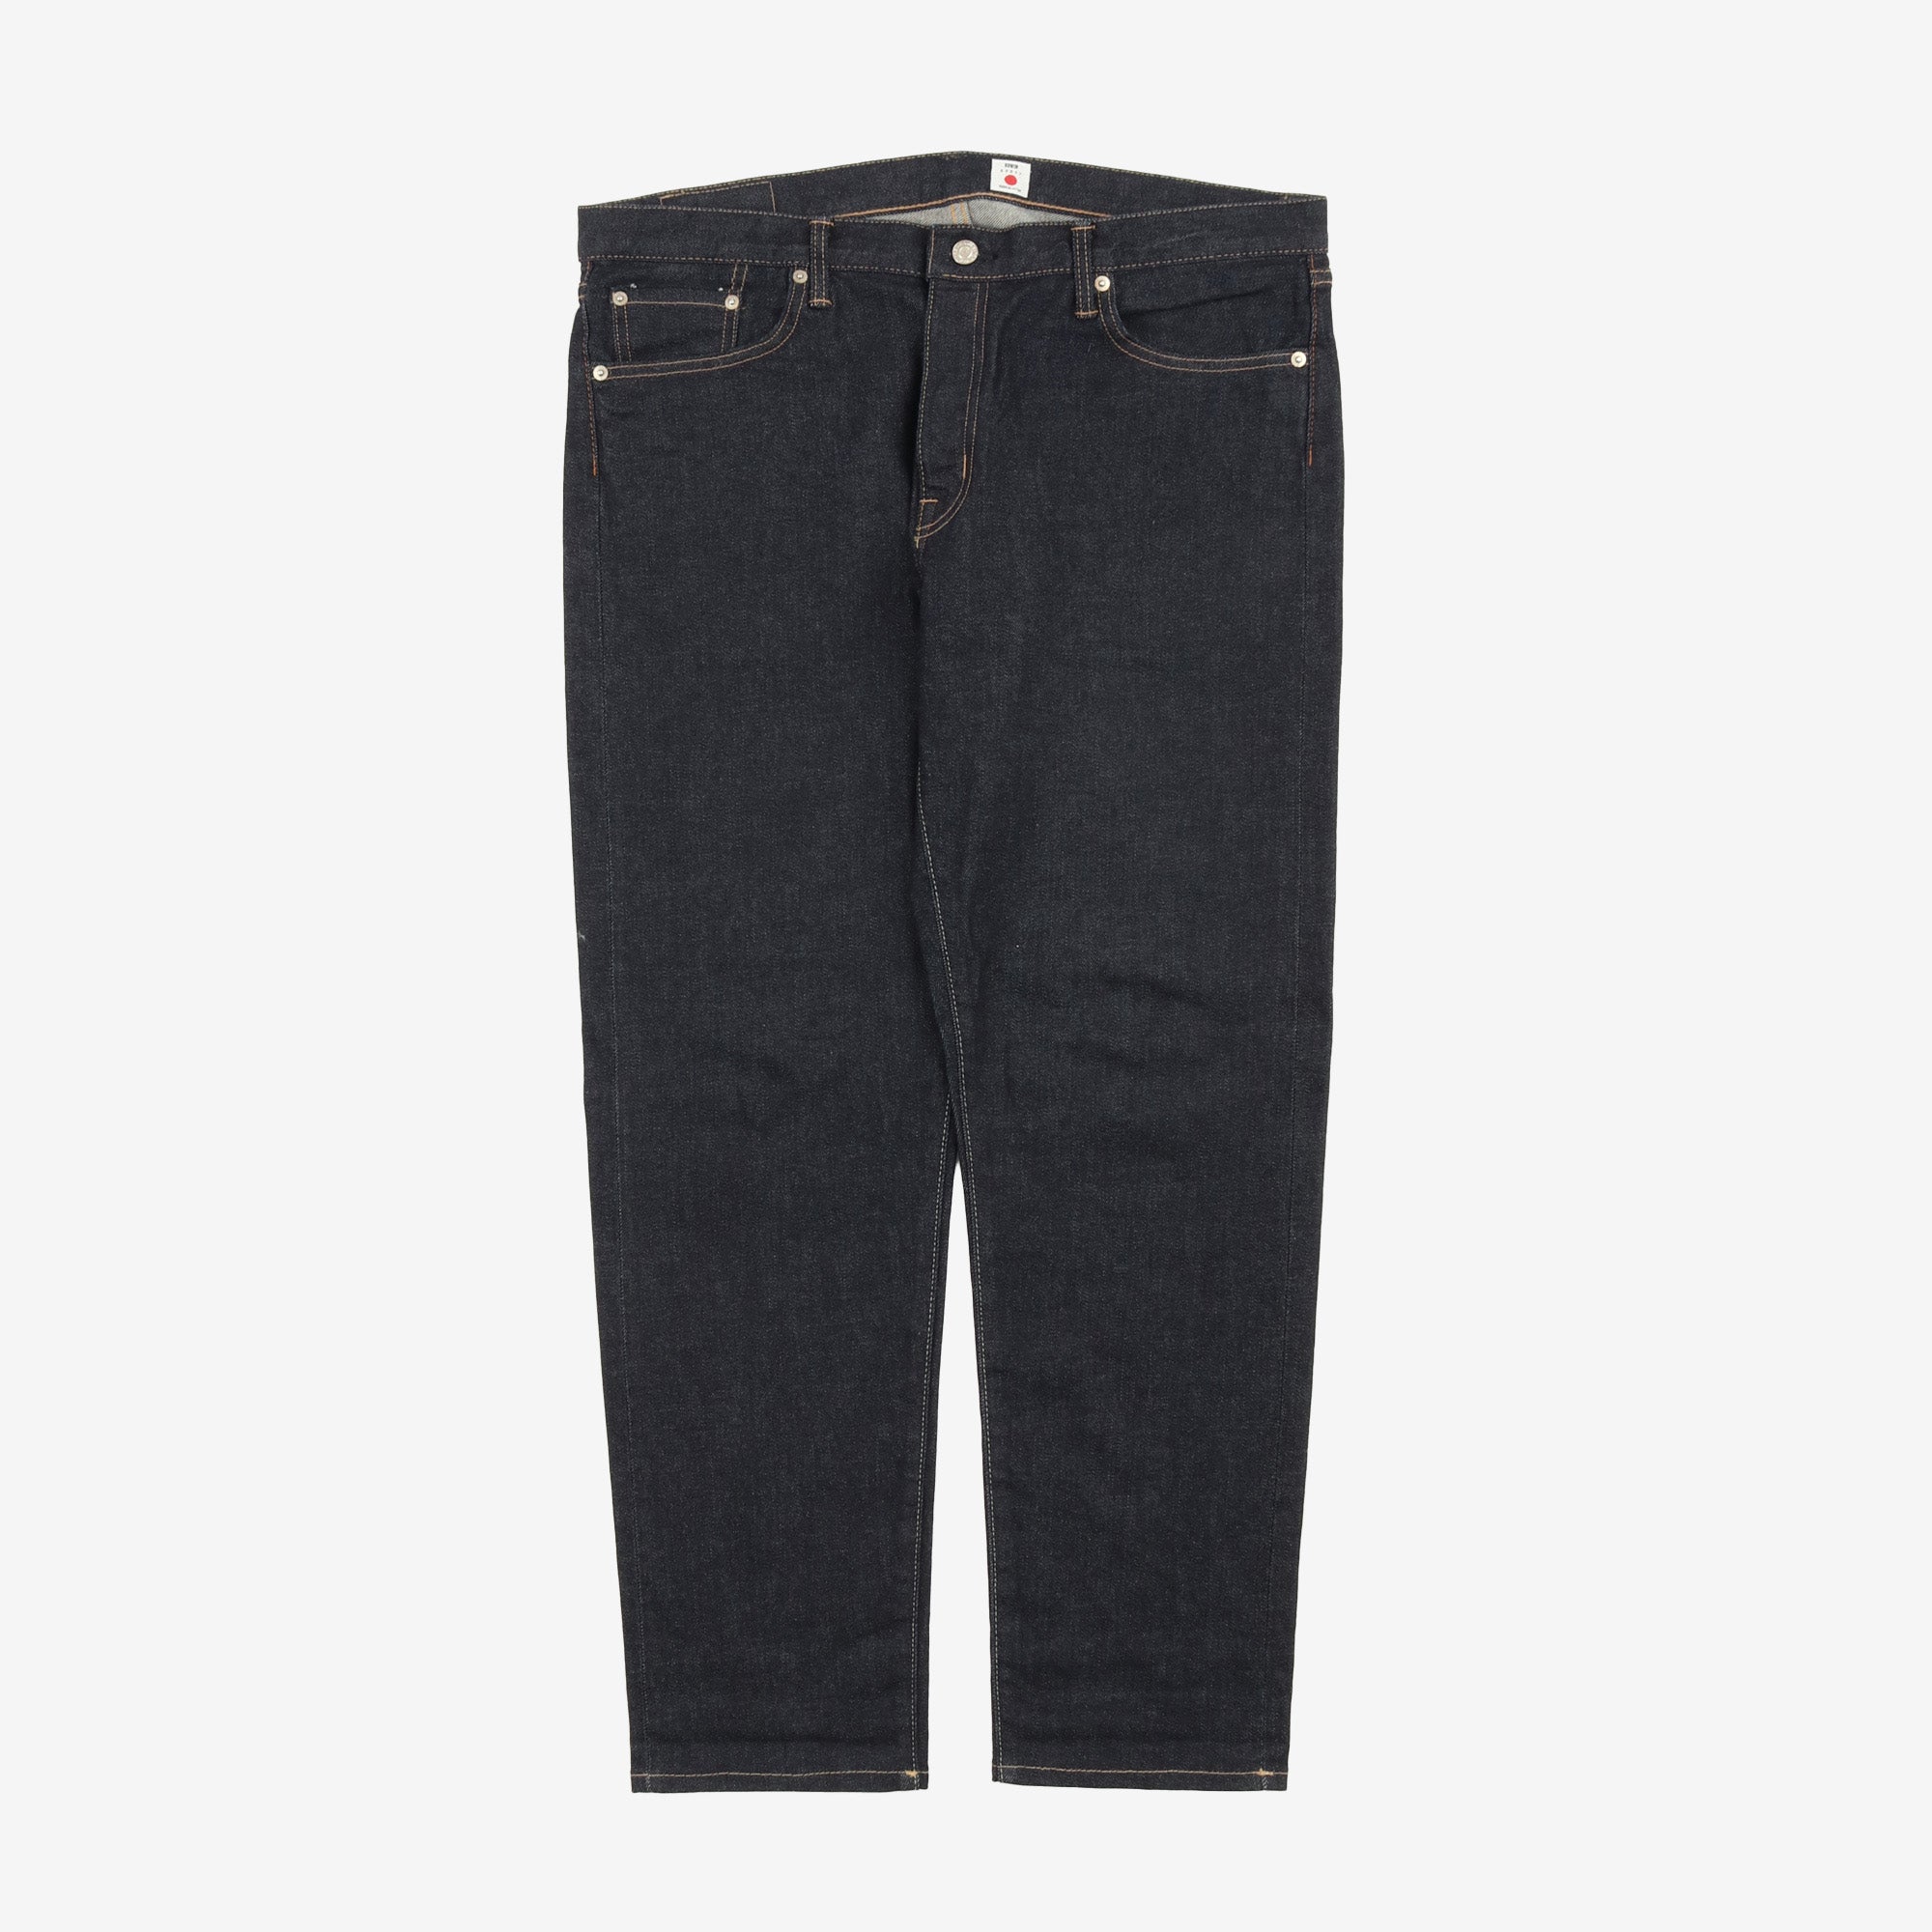 Japan Tapered Jeans